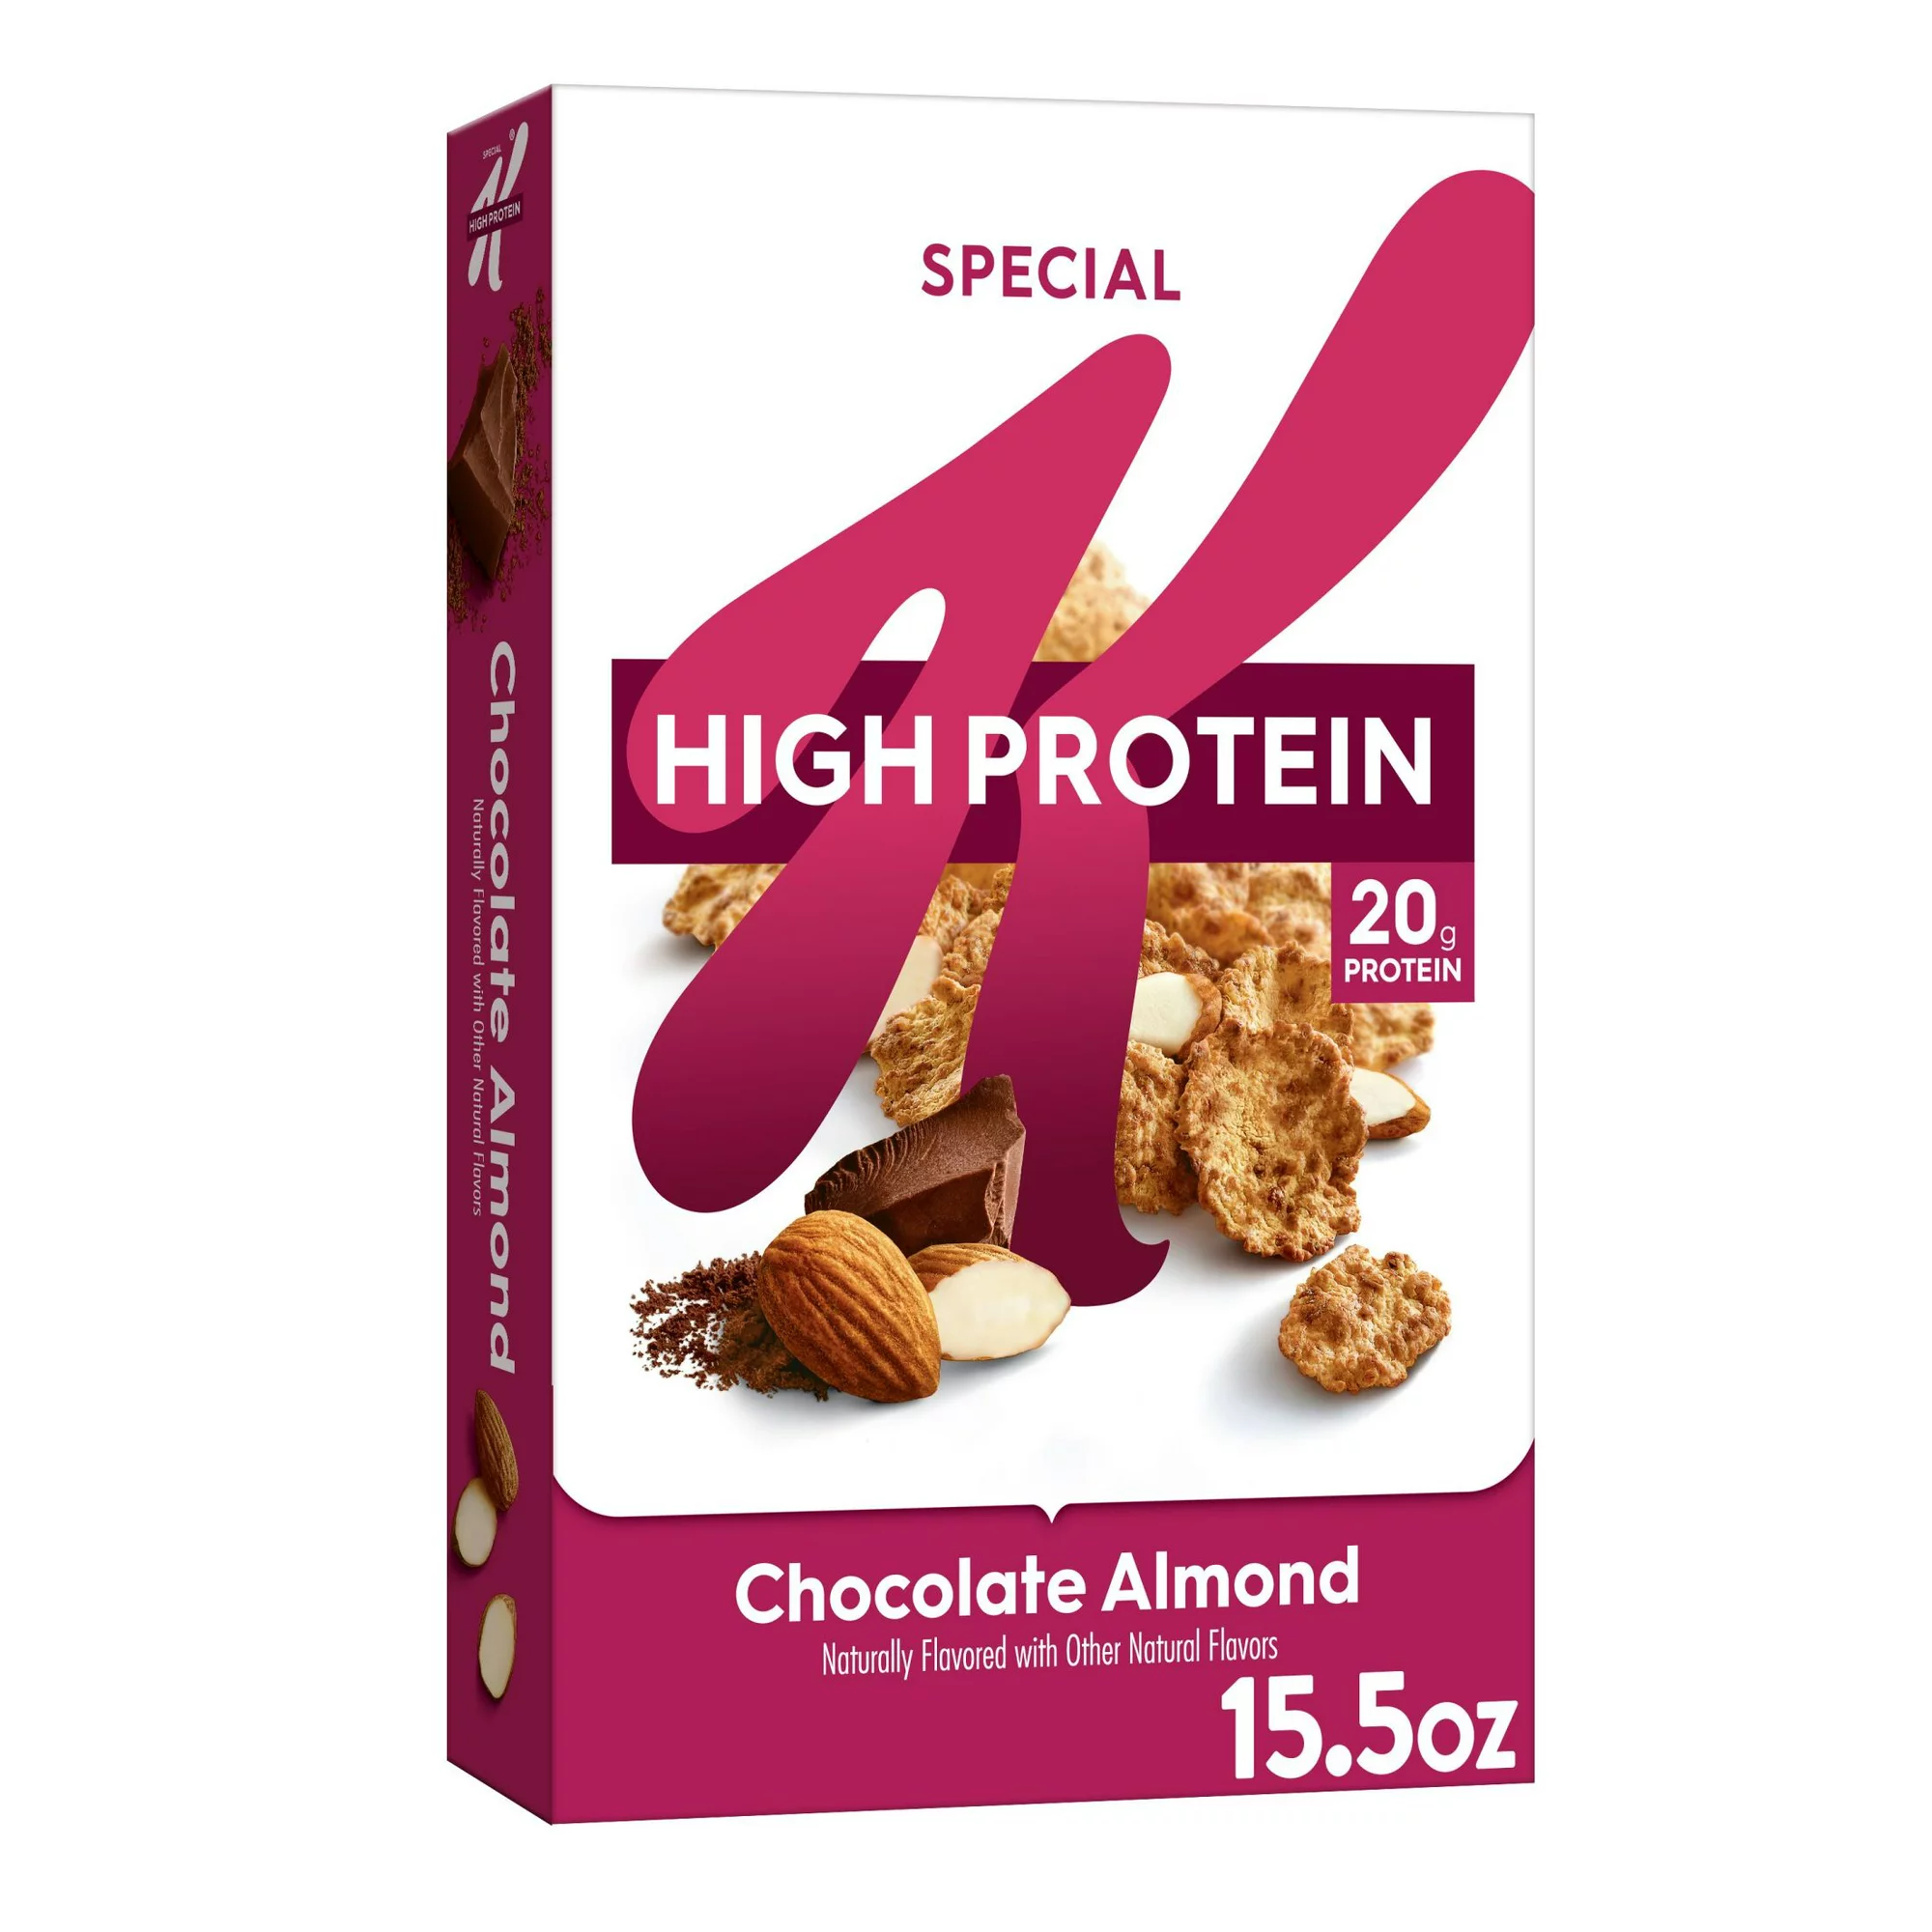 Delight in the irresistible combination of rich chocolate and crunchy almonds, perfectly balanced with high protein to fuel your day.